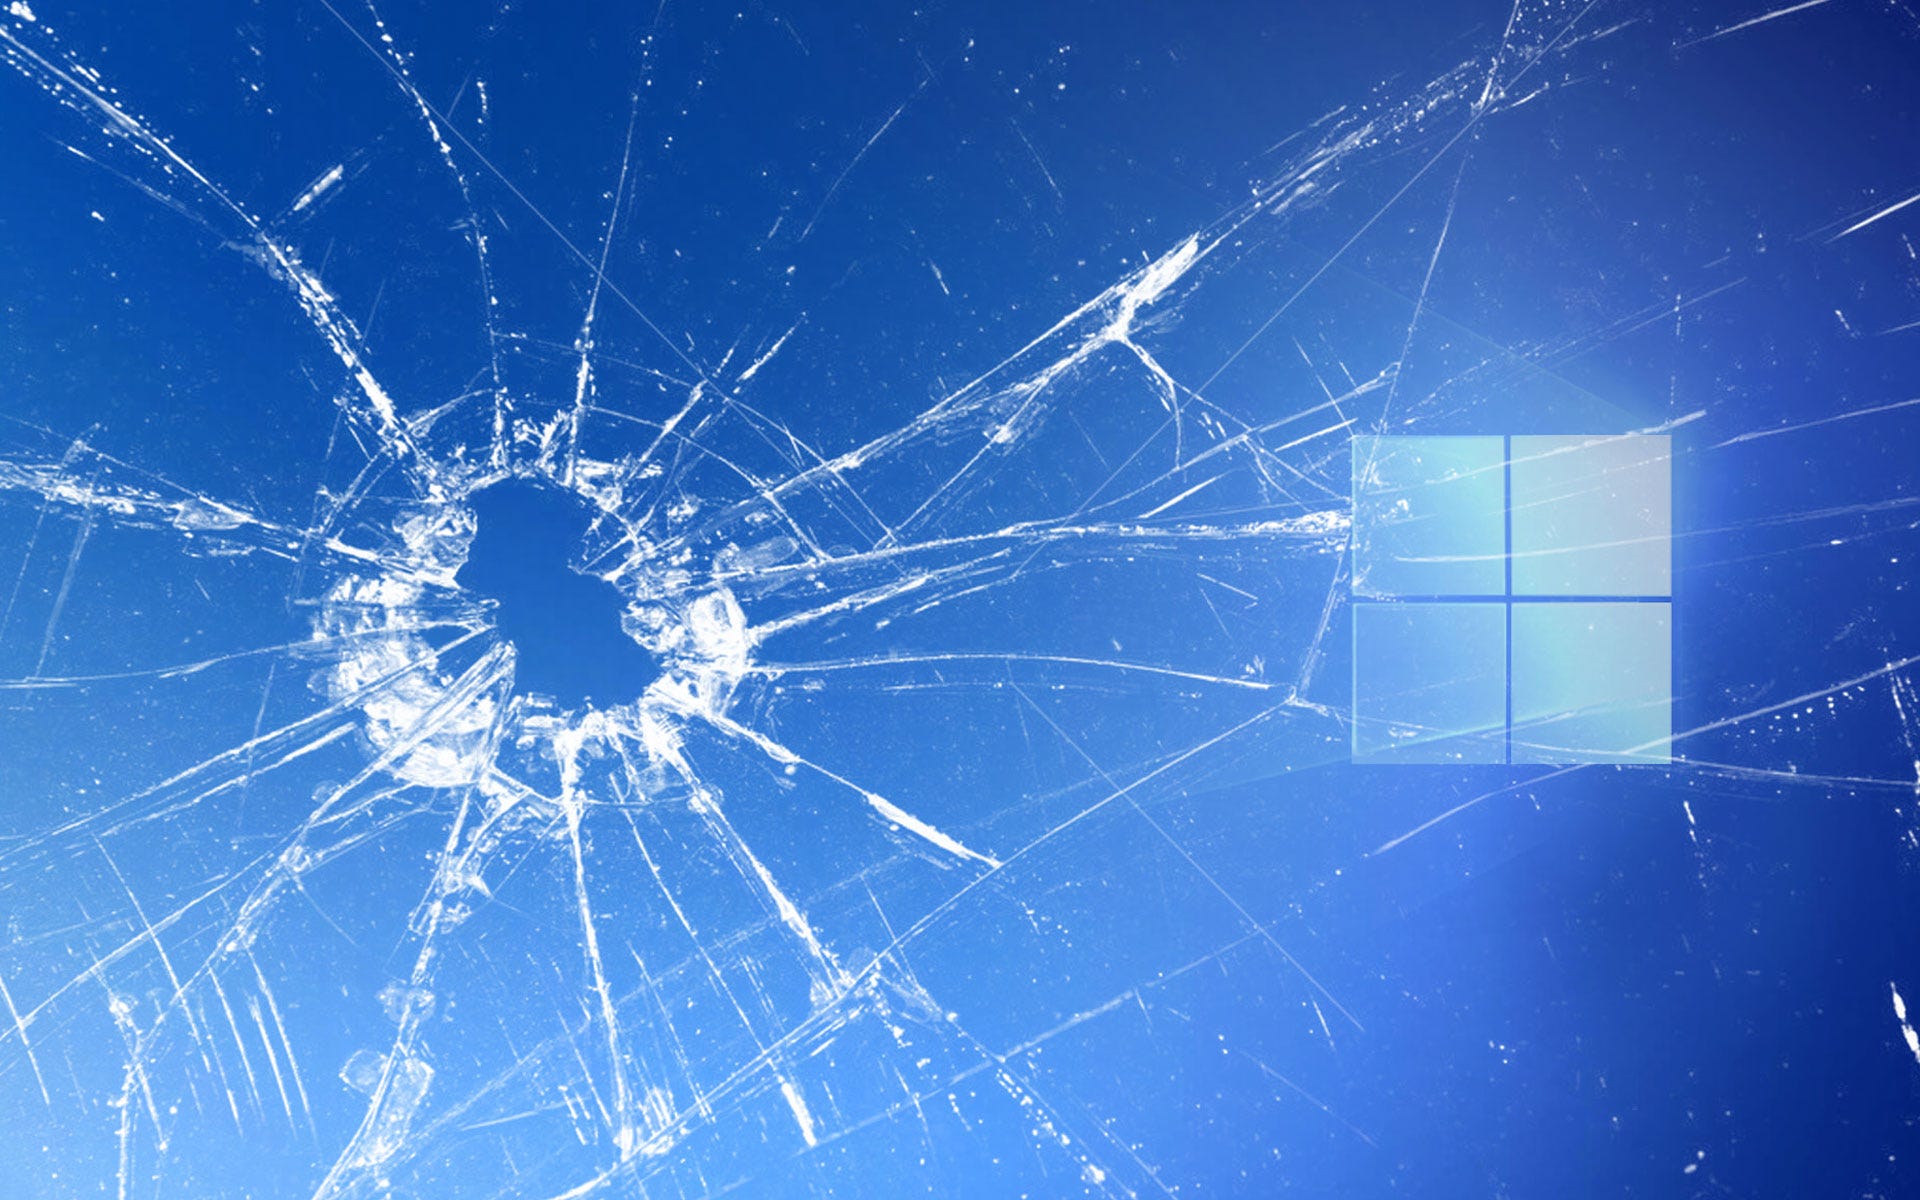 The Windows 11 Saga Continues: Now It Will Be Your Fault, by Kostas  Farkonas, Geek Culture